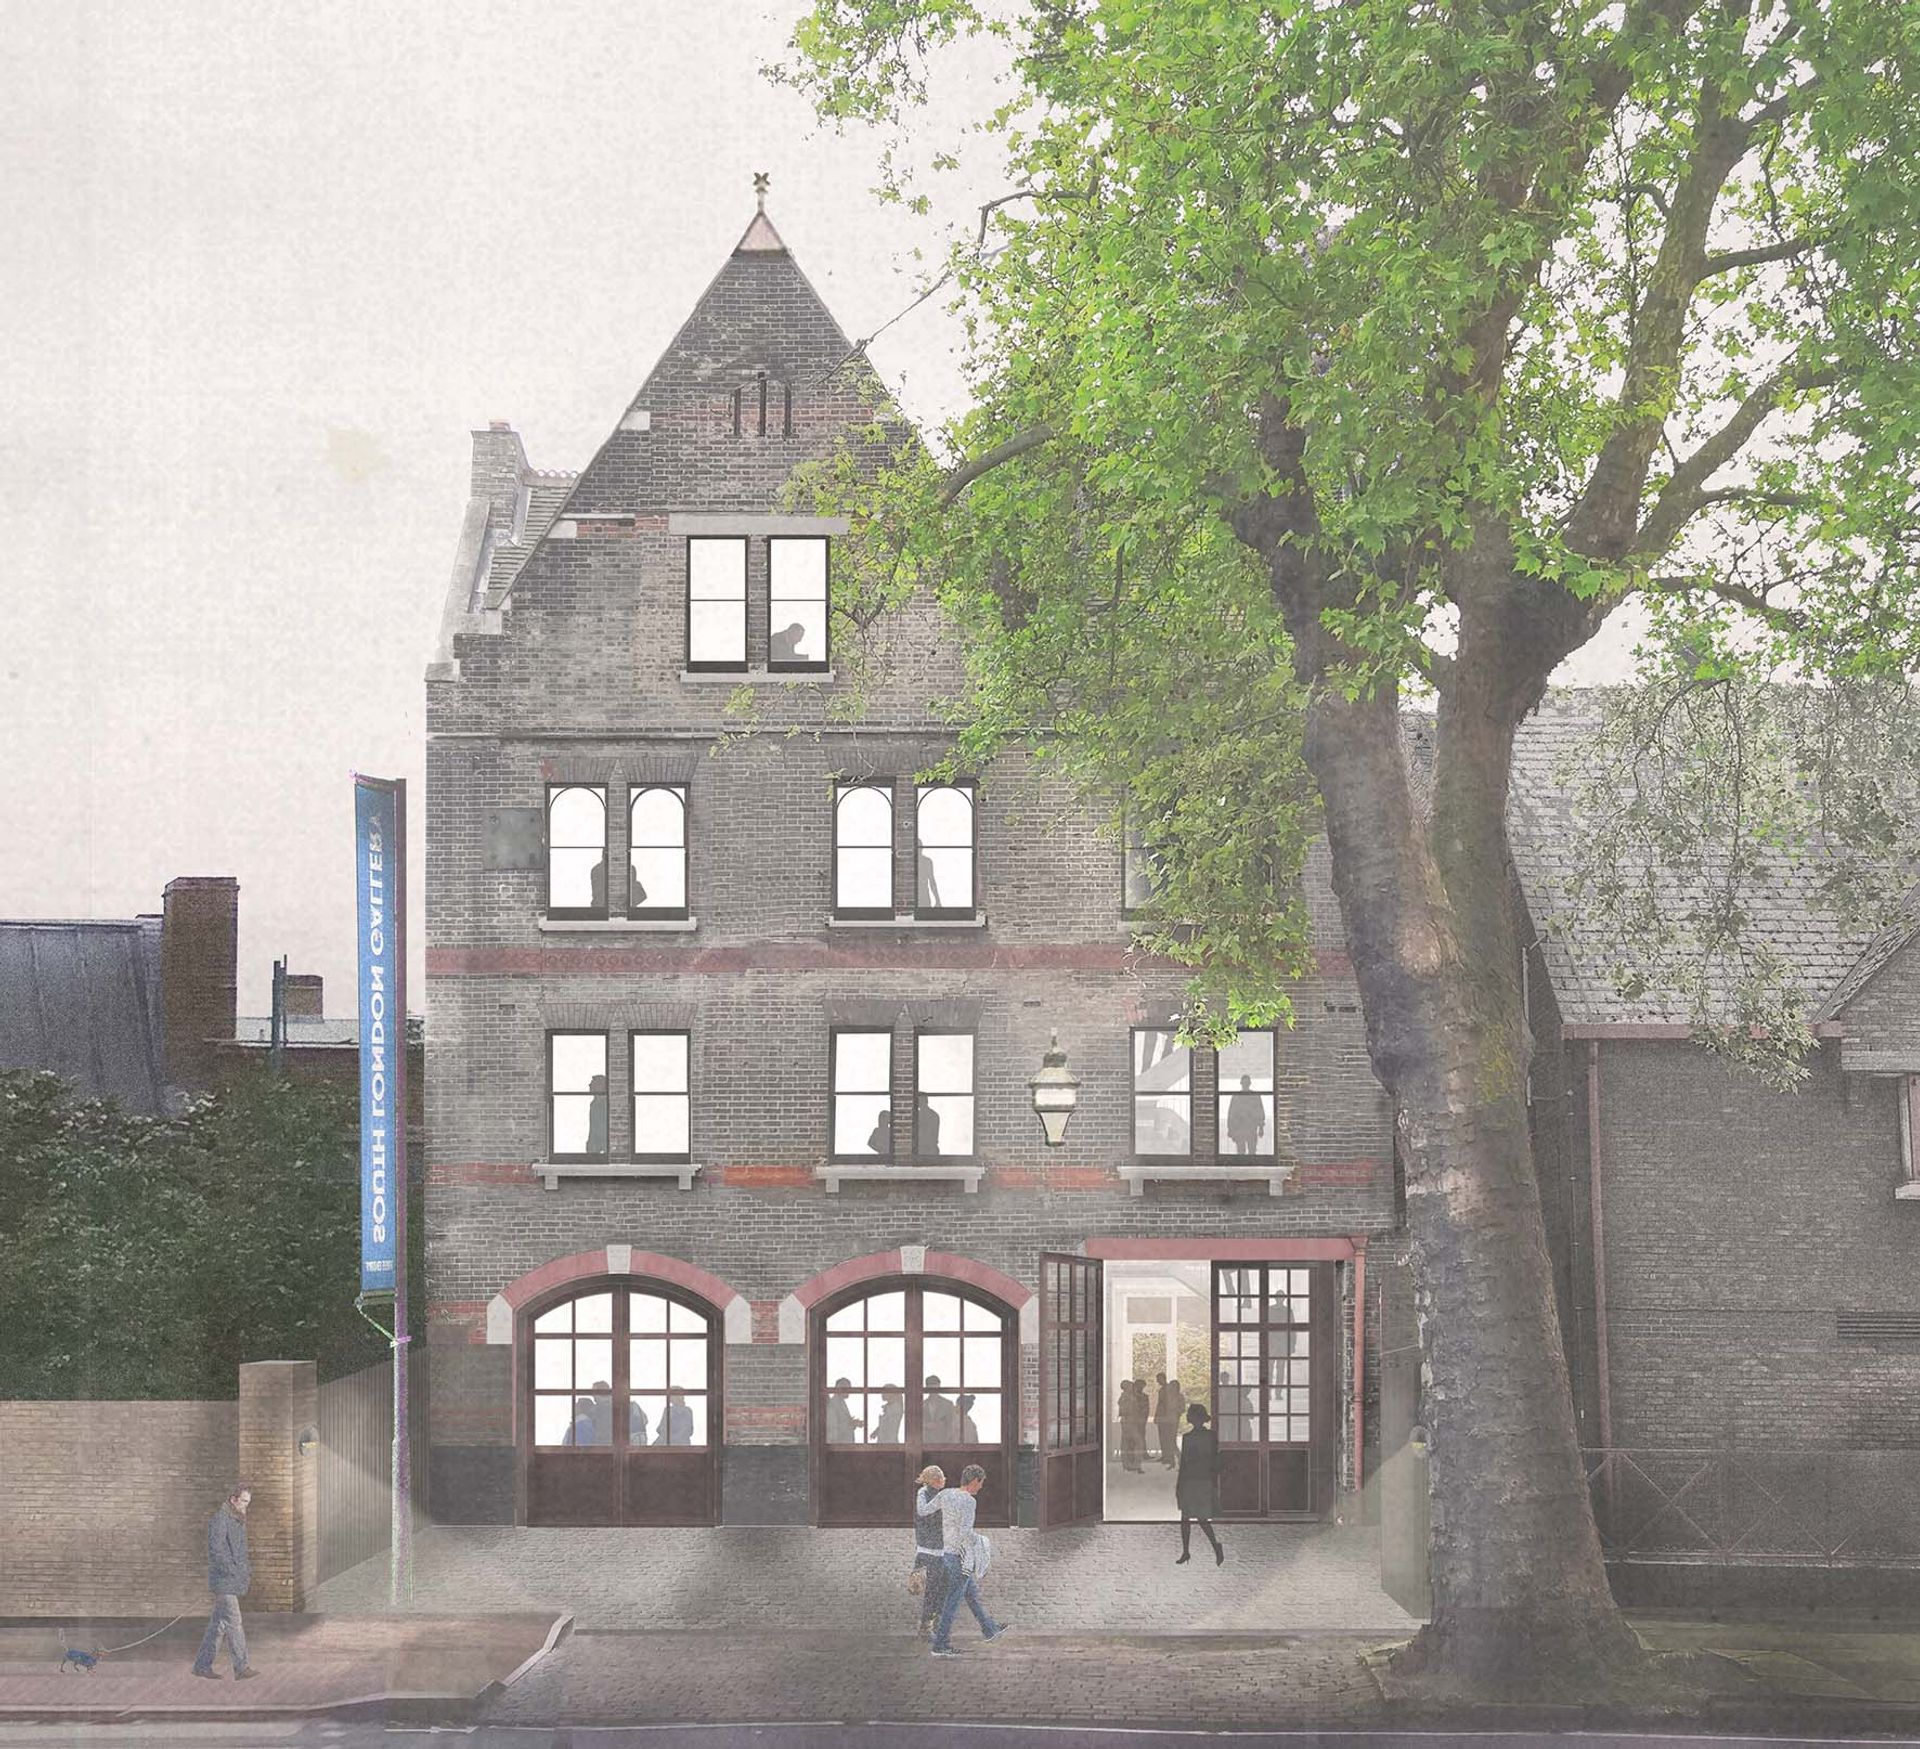 View of proposed exterior of the former Peckham Road Fire Station by 6a architects South London Gallery and 6a architects